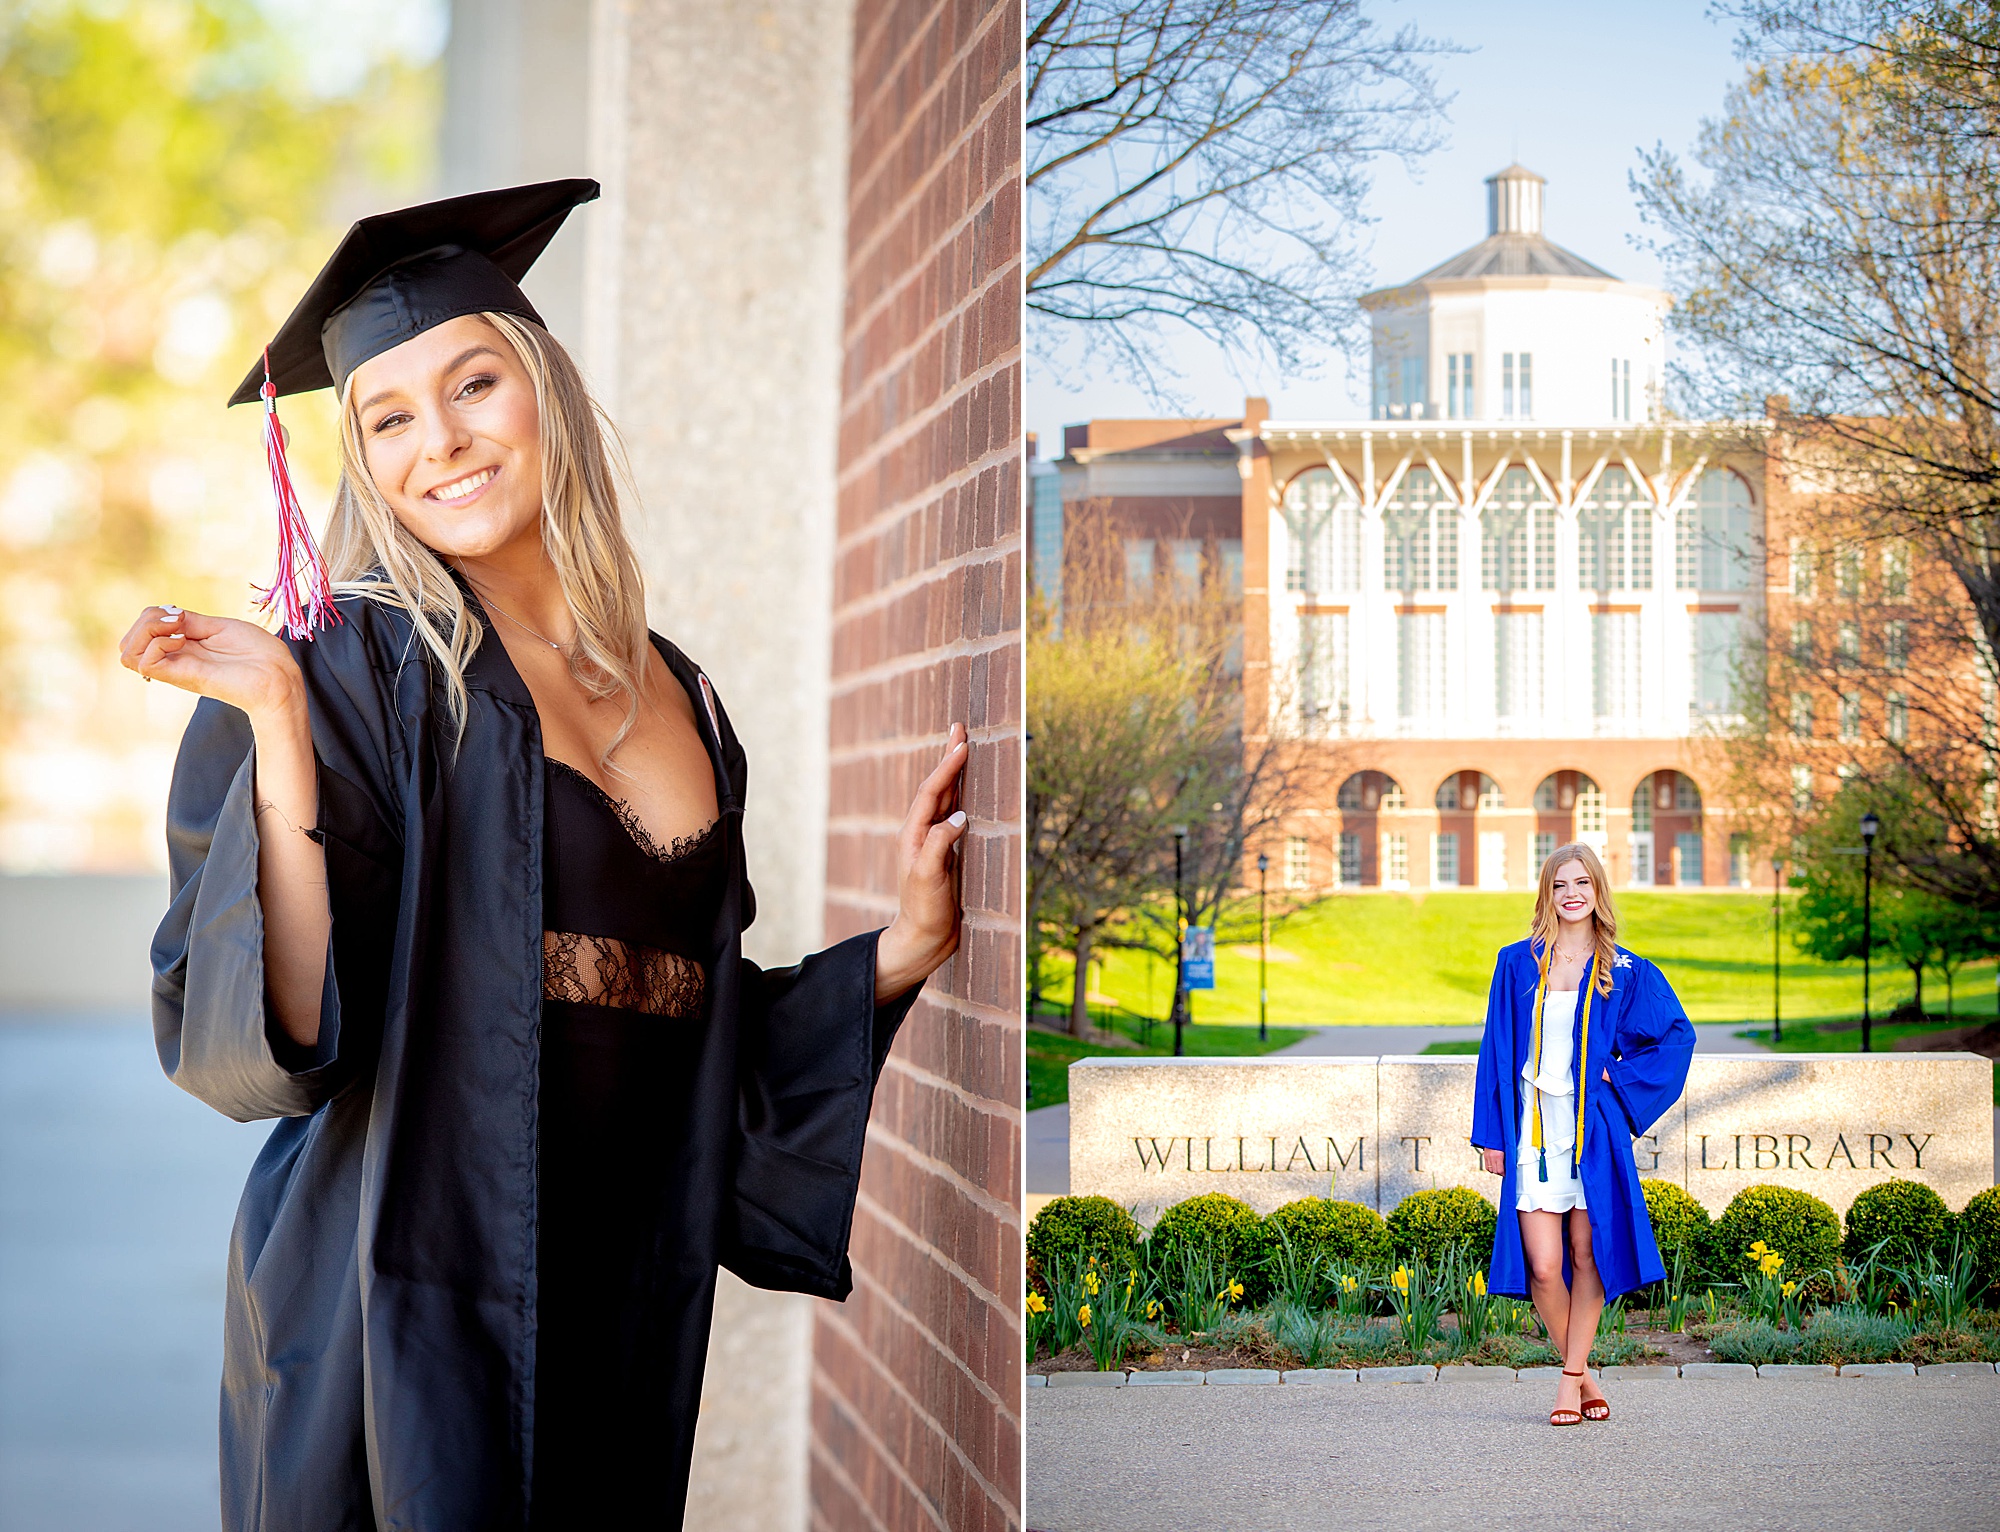 Boutique senior experience provided by luxury portrait photographer Emily finger